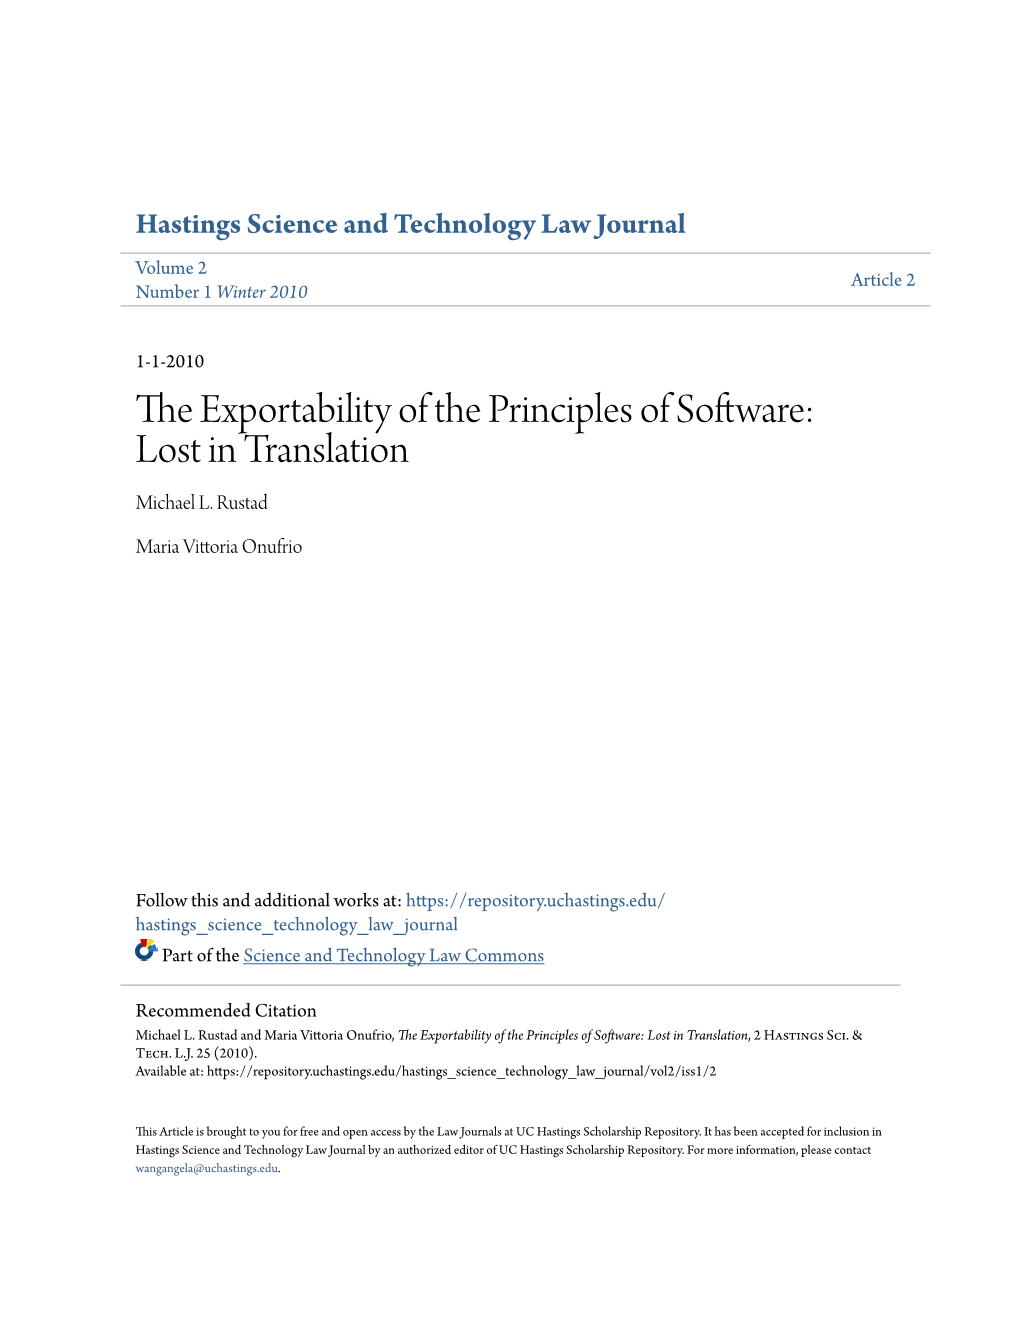 The Exportability of the Principles of Software: Lost in Translation Michael L